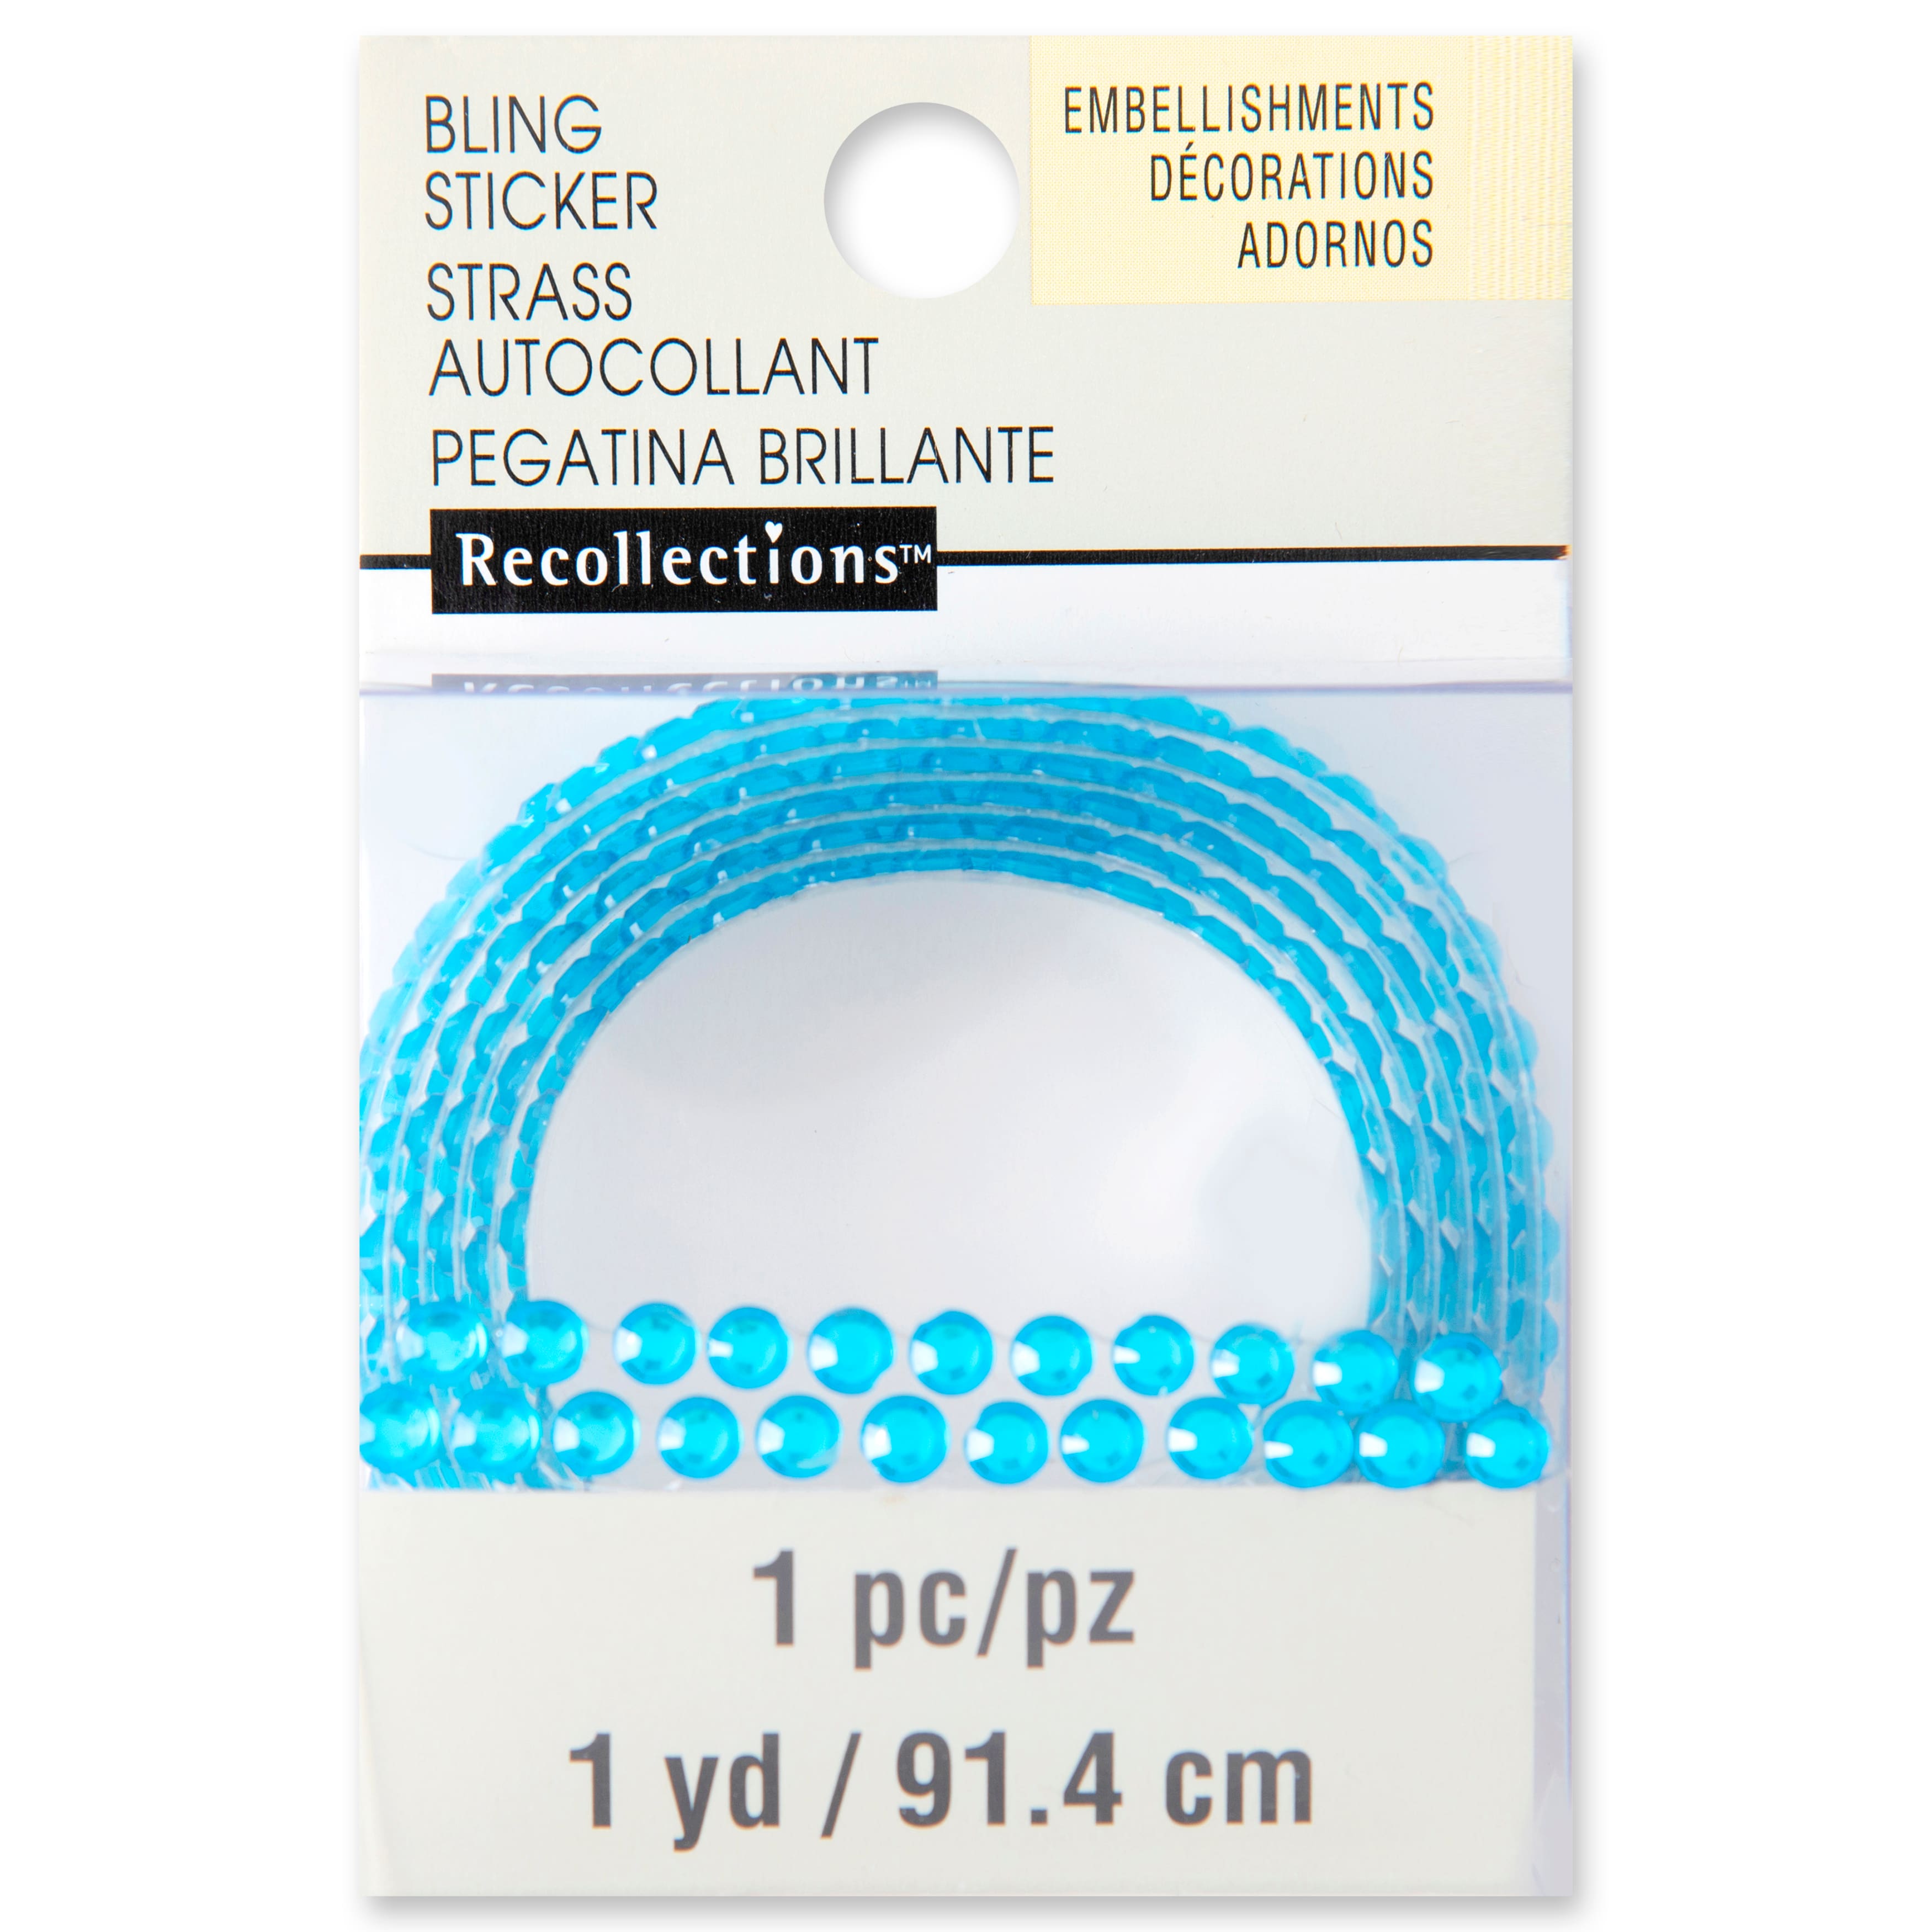 Bling on a Roll™ Double Row Rhinestones by Recollections™